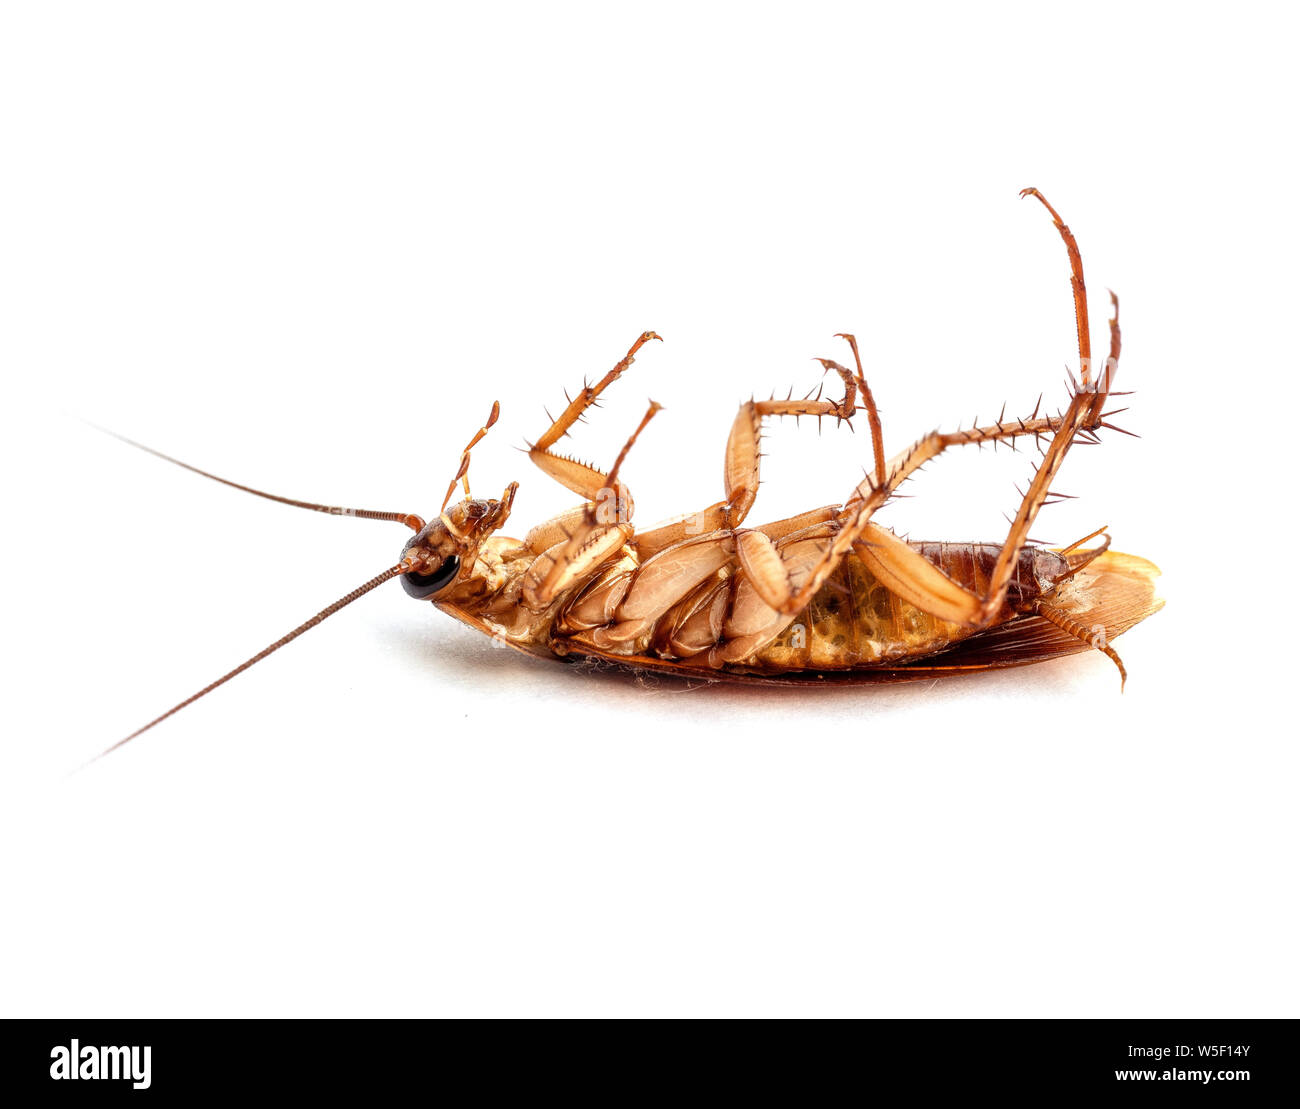 Dead cockroaches isolated on white background. Animals with germs and dirt  Stock Photo - Alamy